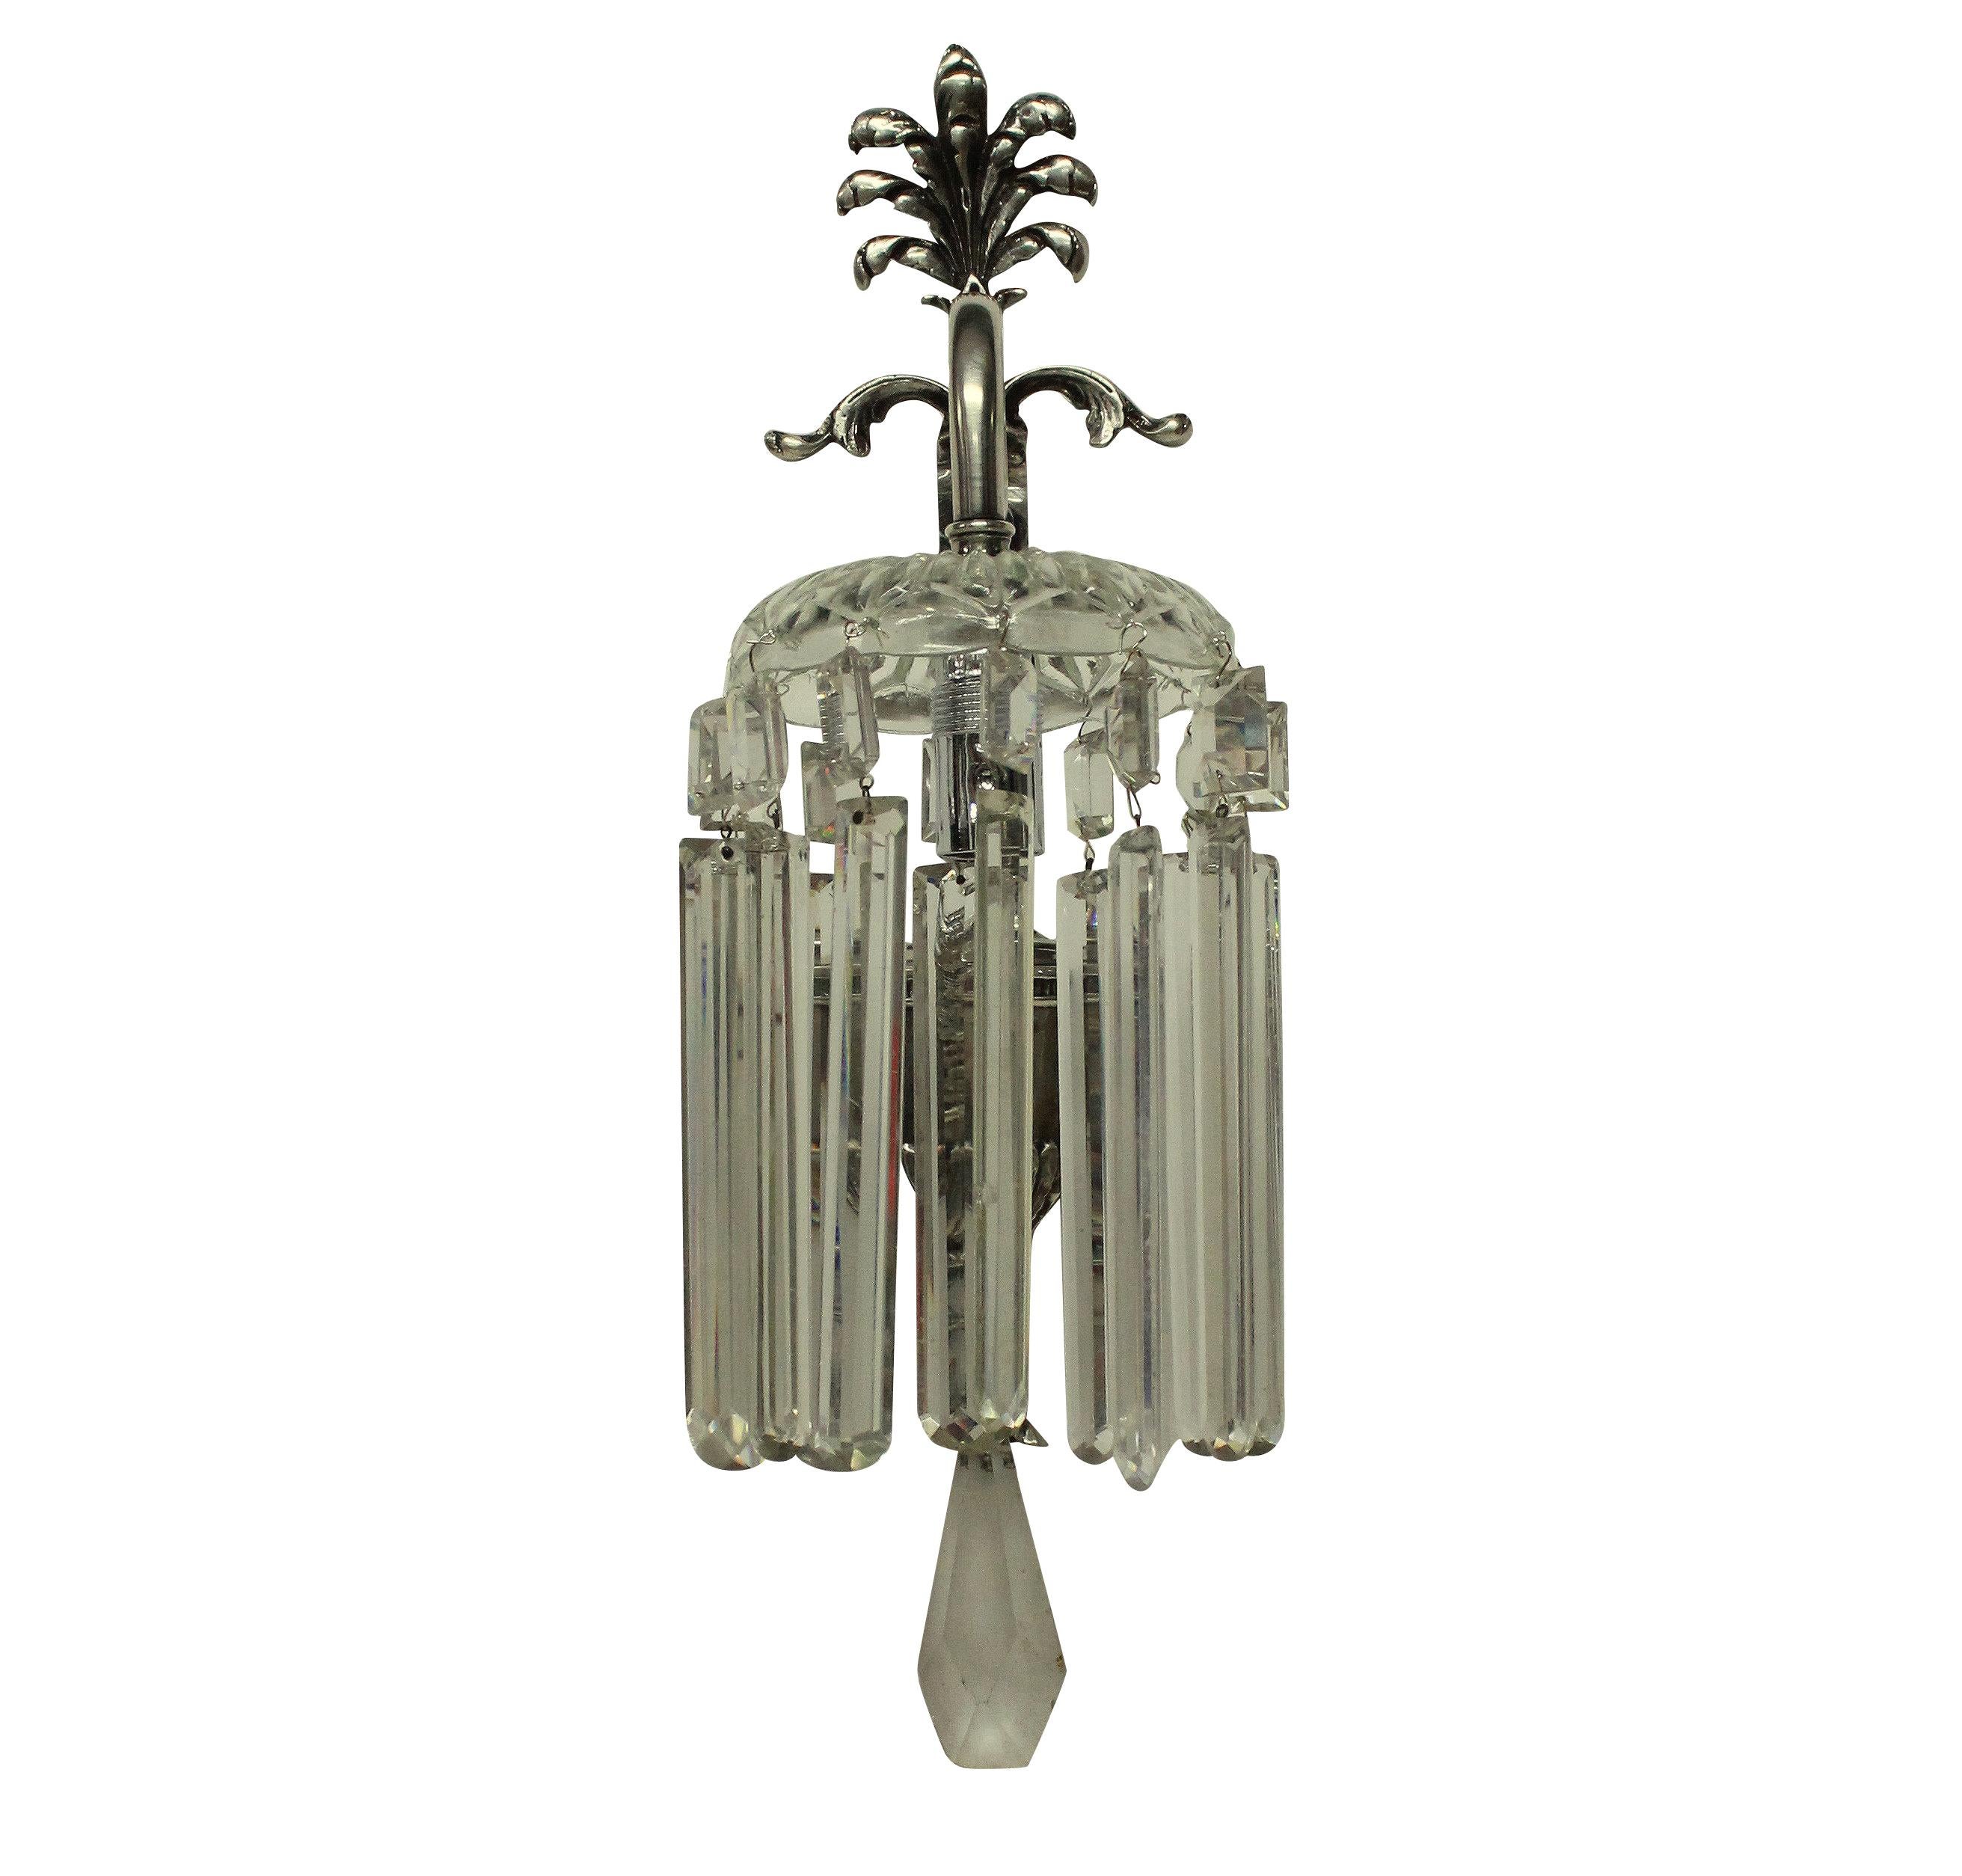 A set of four Edwardian Regency Revival silver plated wall sconces with cut-glass canopies and prism drops.